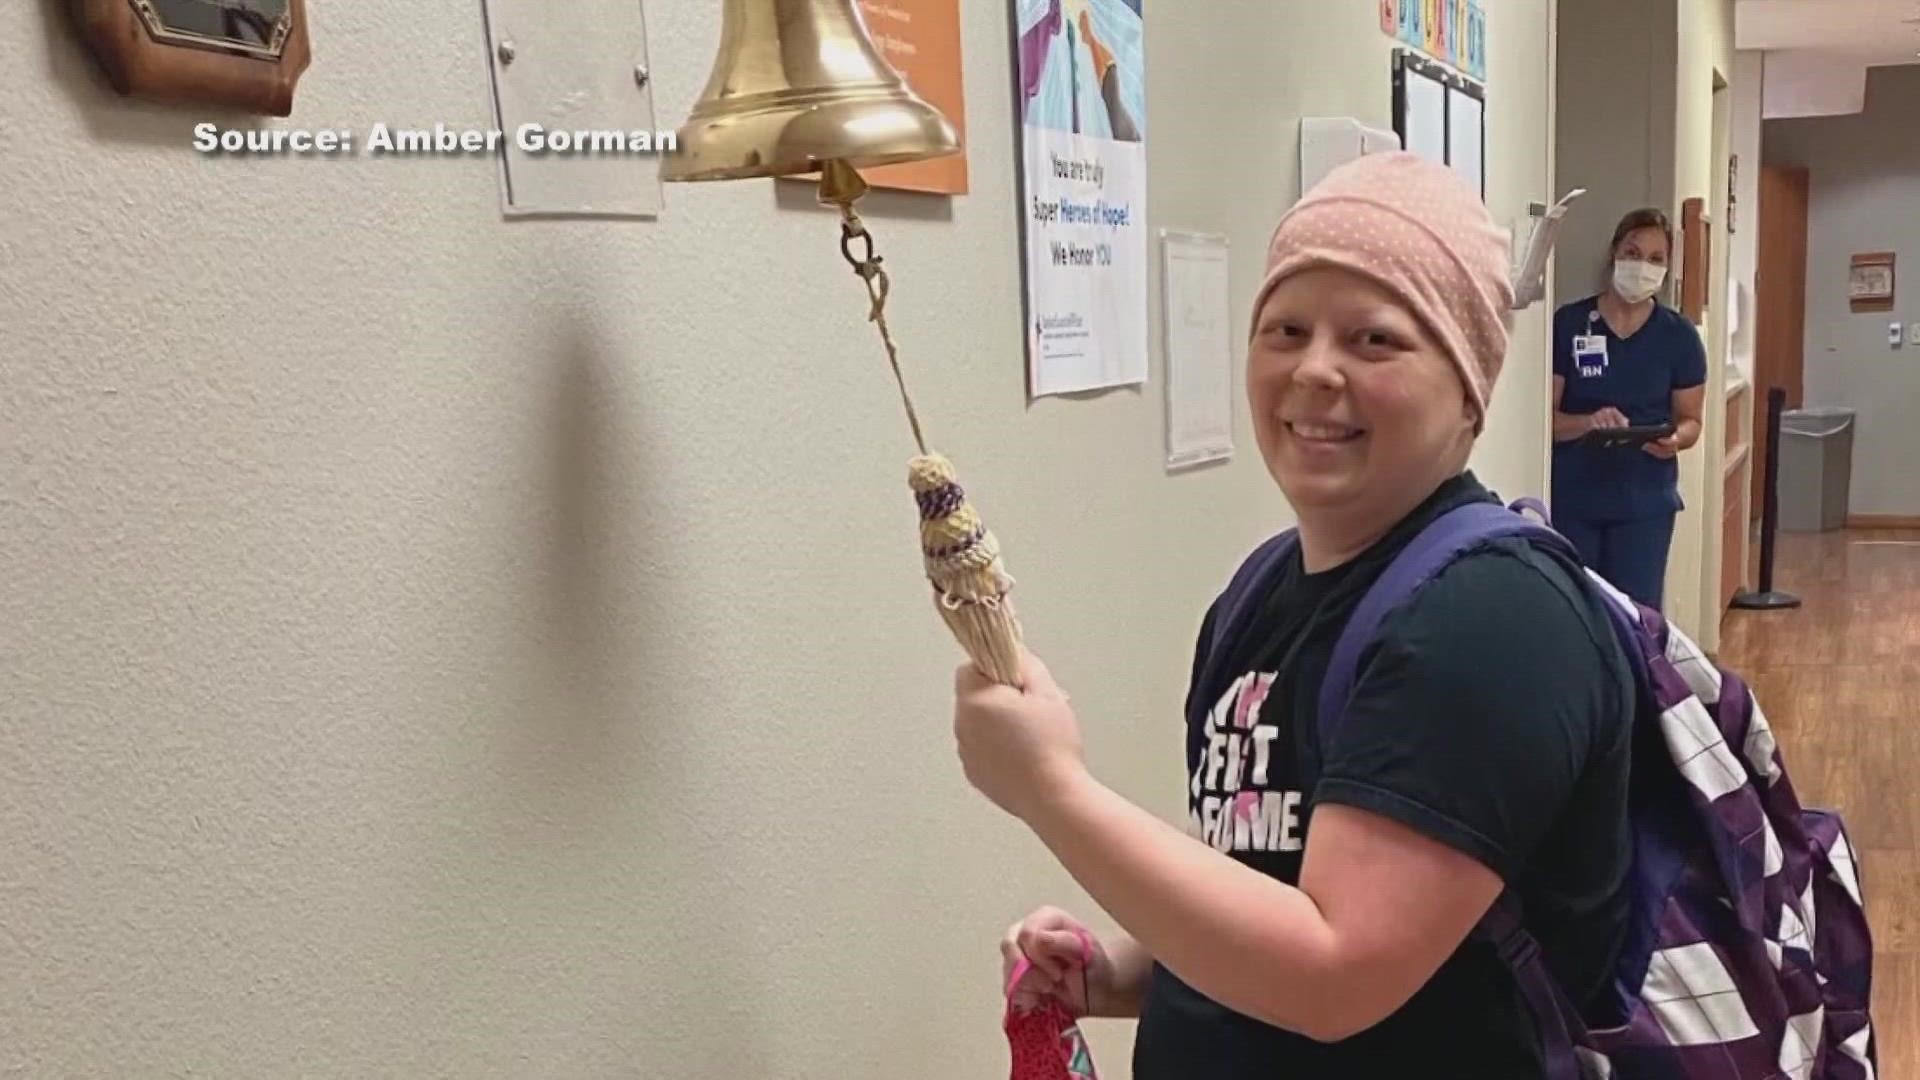 Amber Gorman of Copperas Cove was diagnosed with breast cancer at 36. She says she wants to make sure everyone is aware of changes in their bodies.